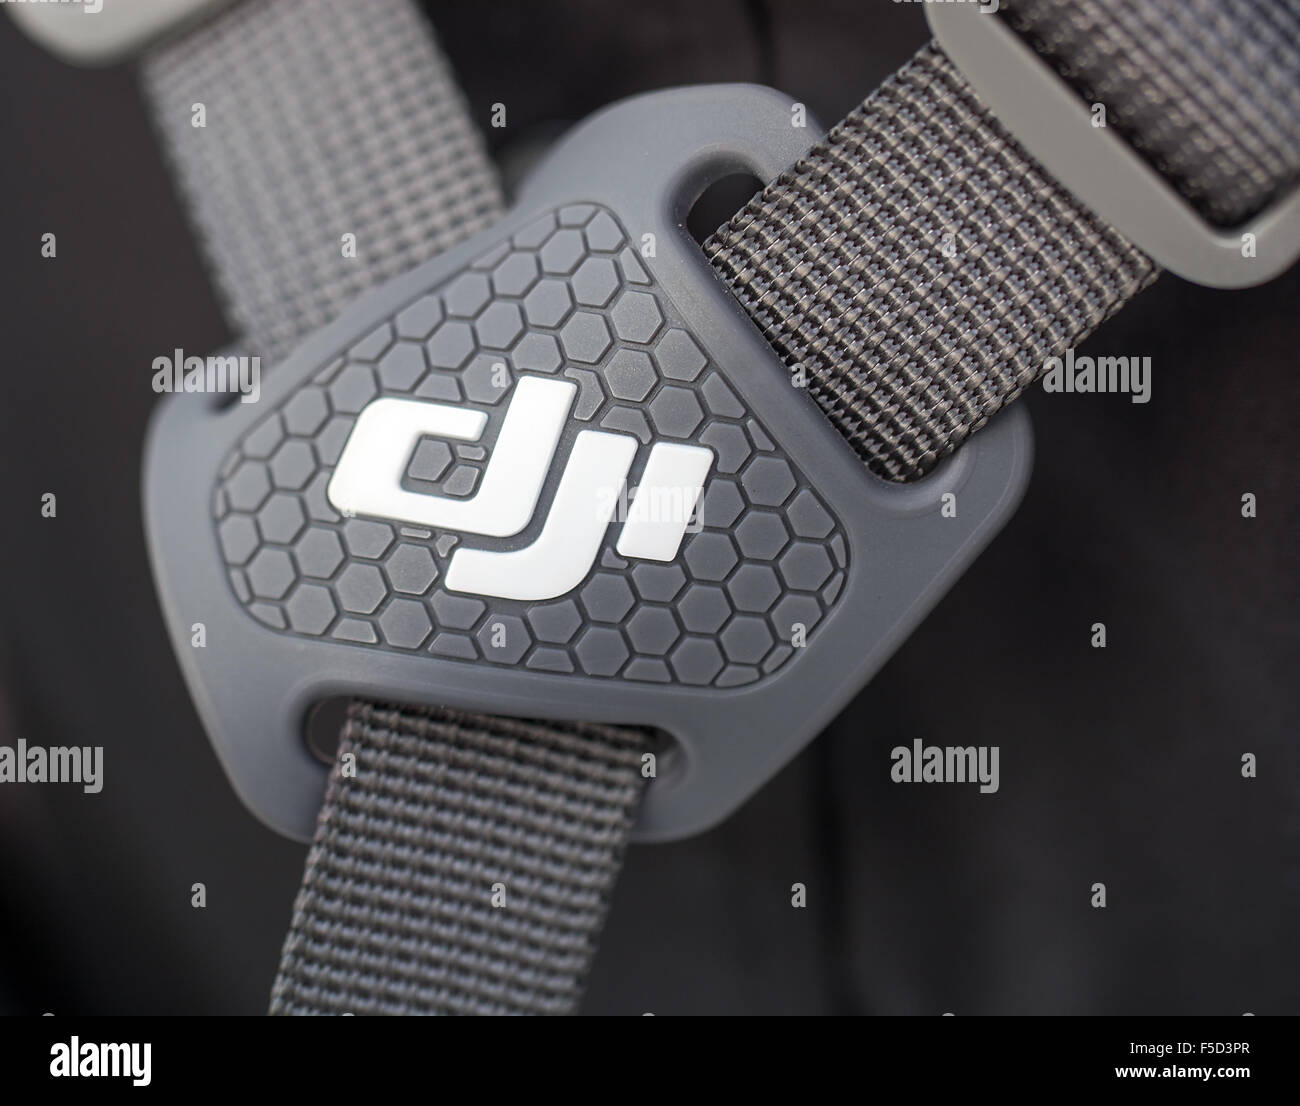 Zrenjanin, SERBIA: October 2015, Image of the Dji Inspire 1 drone UAV quadcopter  remote controller strap detail with logo Stock Photo